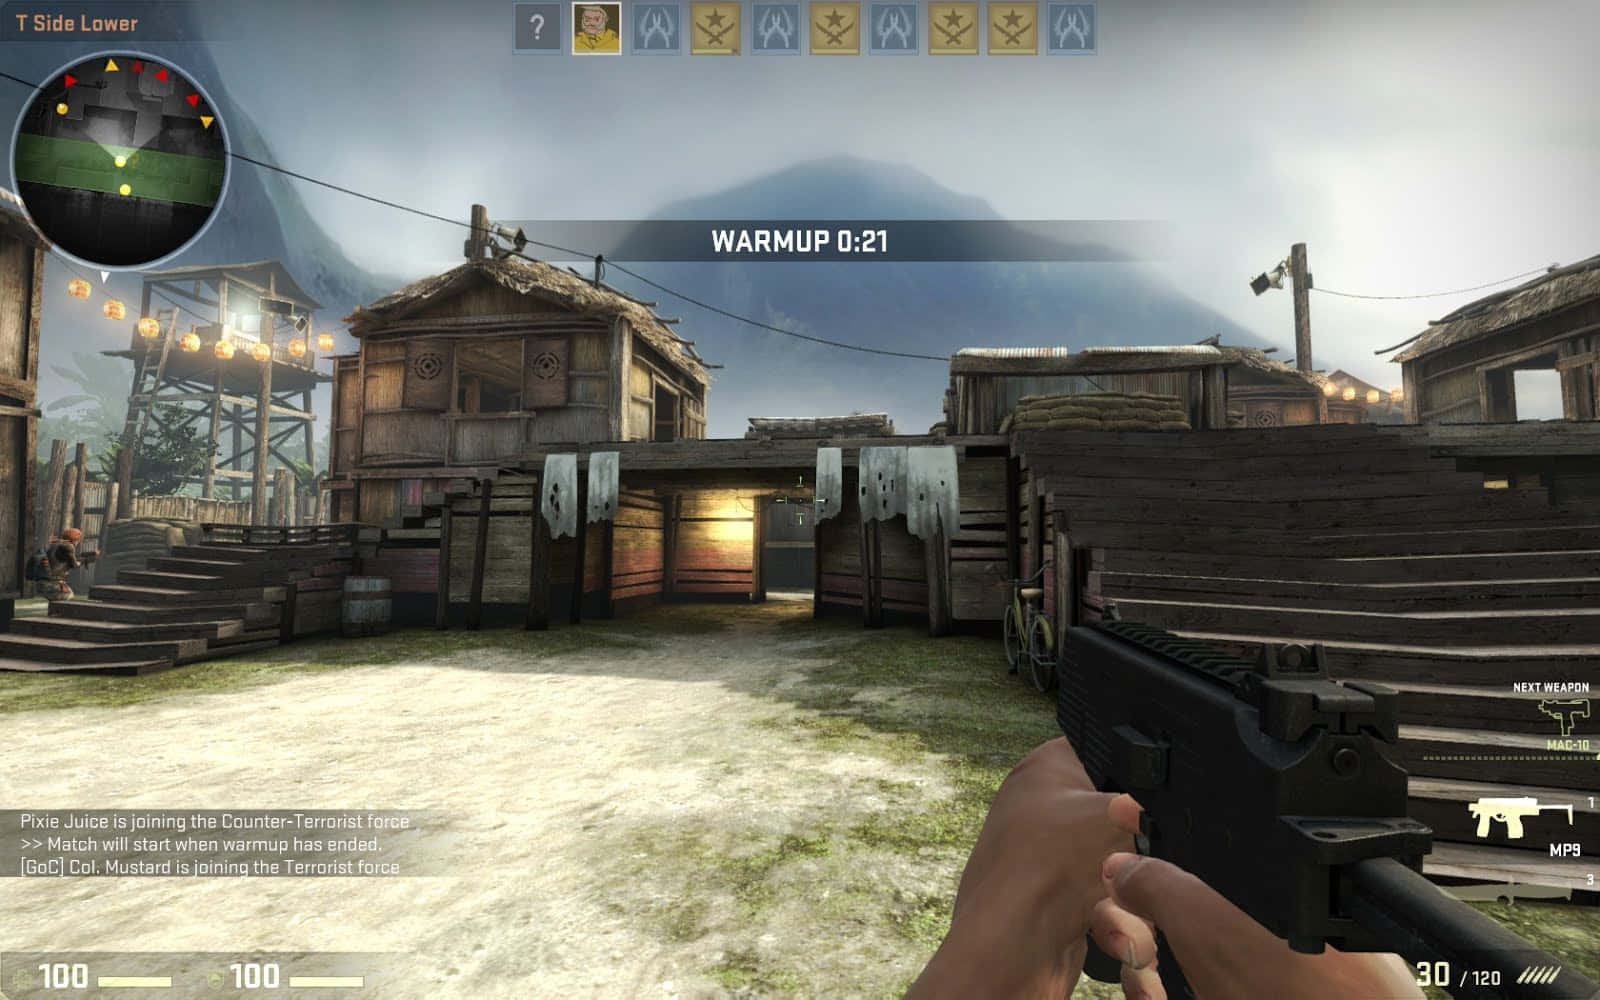 CS:GO Mobile Clone for Android 'Global Offensive Mobile' Spotted on Google  Play Store